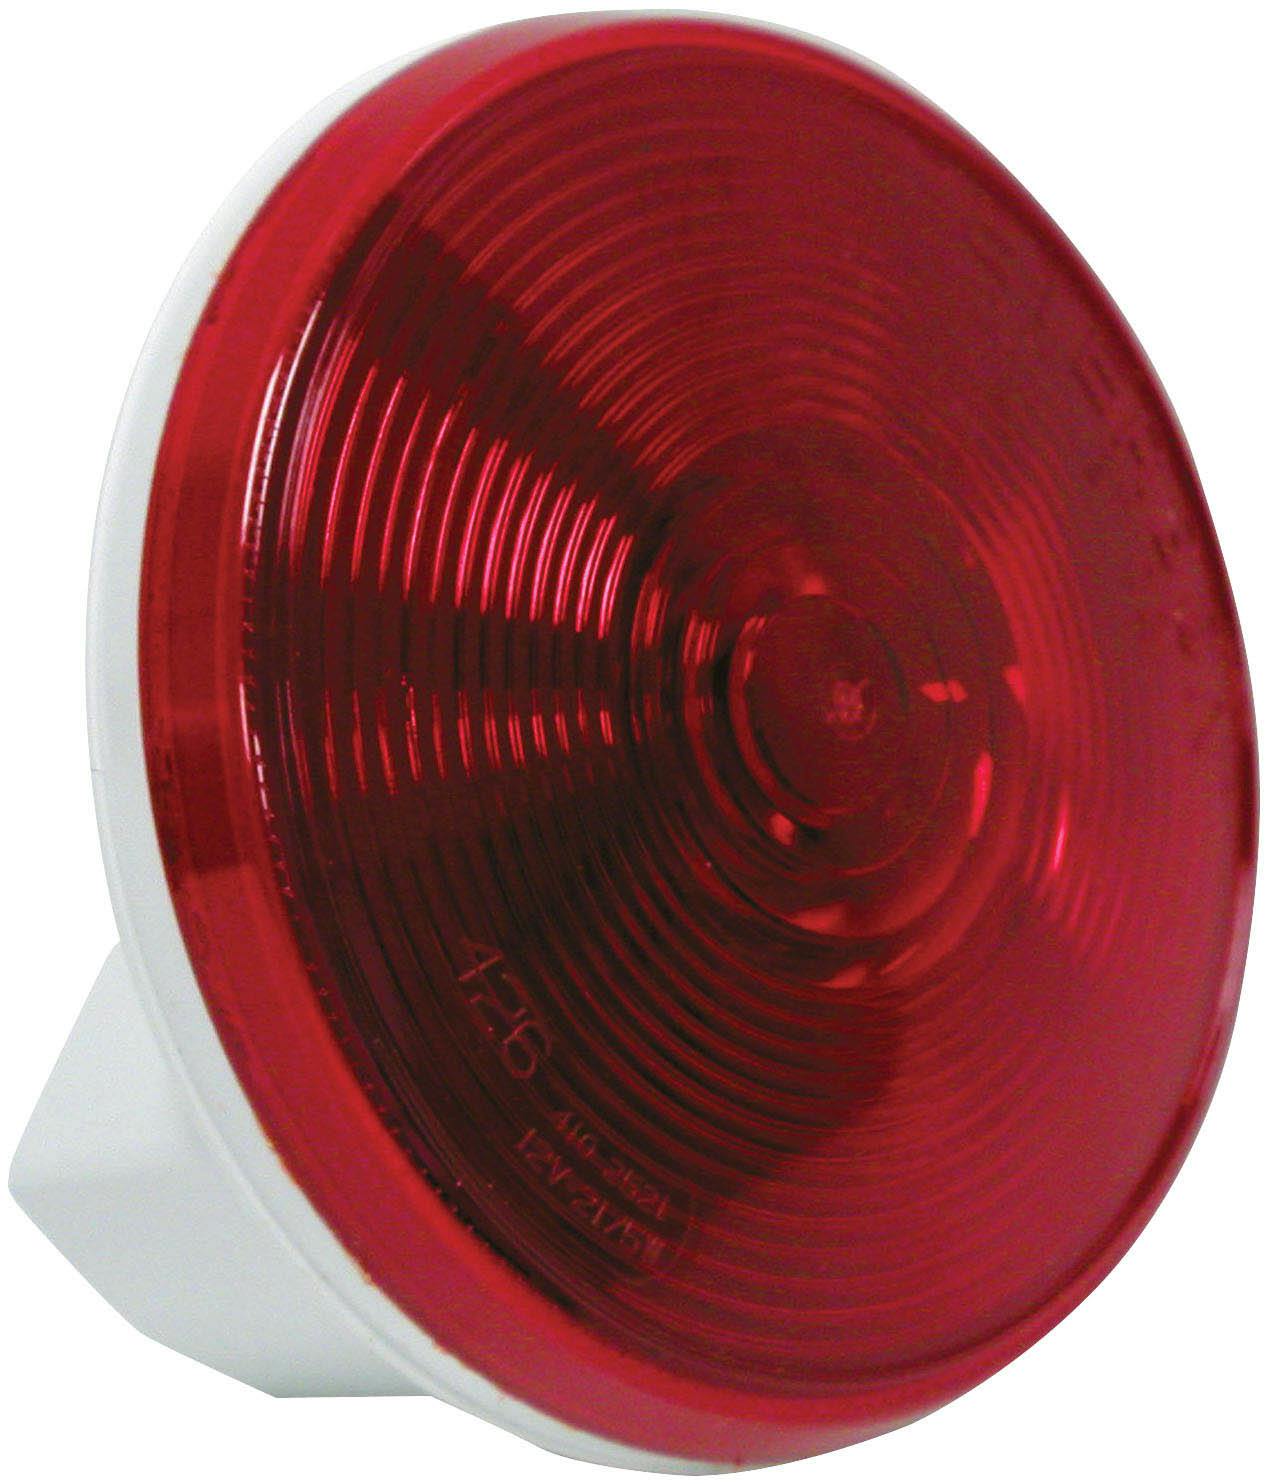 Incandescent Stop/Turn/Tail, Round, Long-Life, 4", red, bulk pack (Pack of 48)